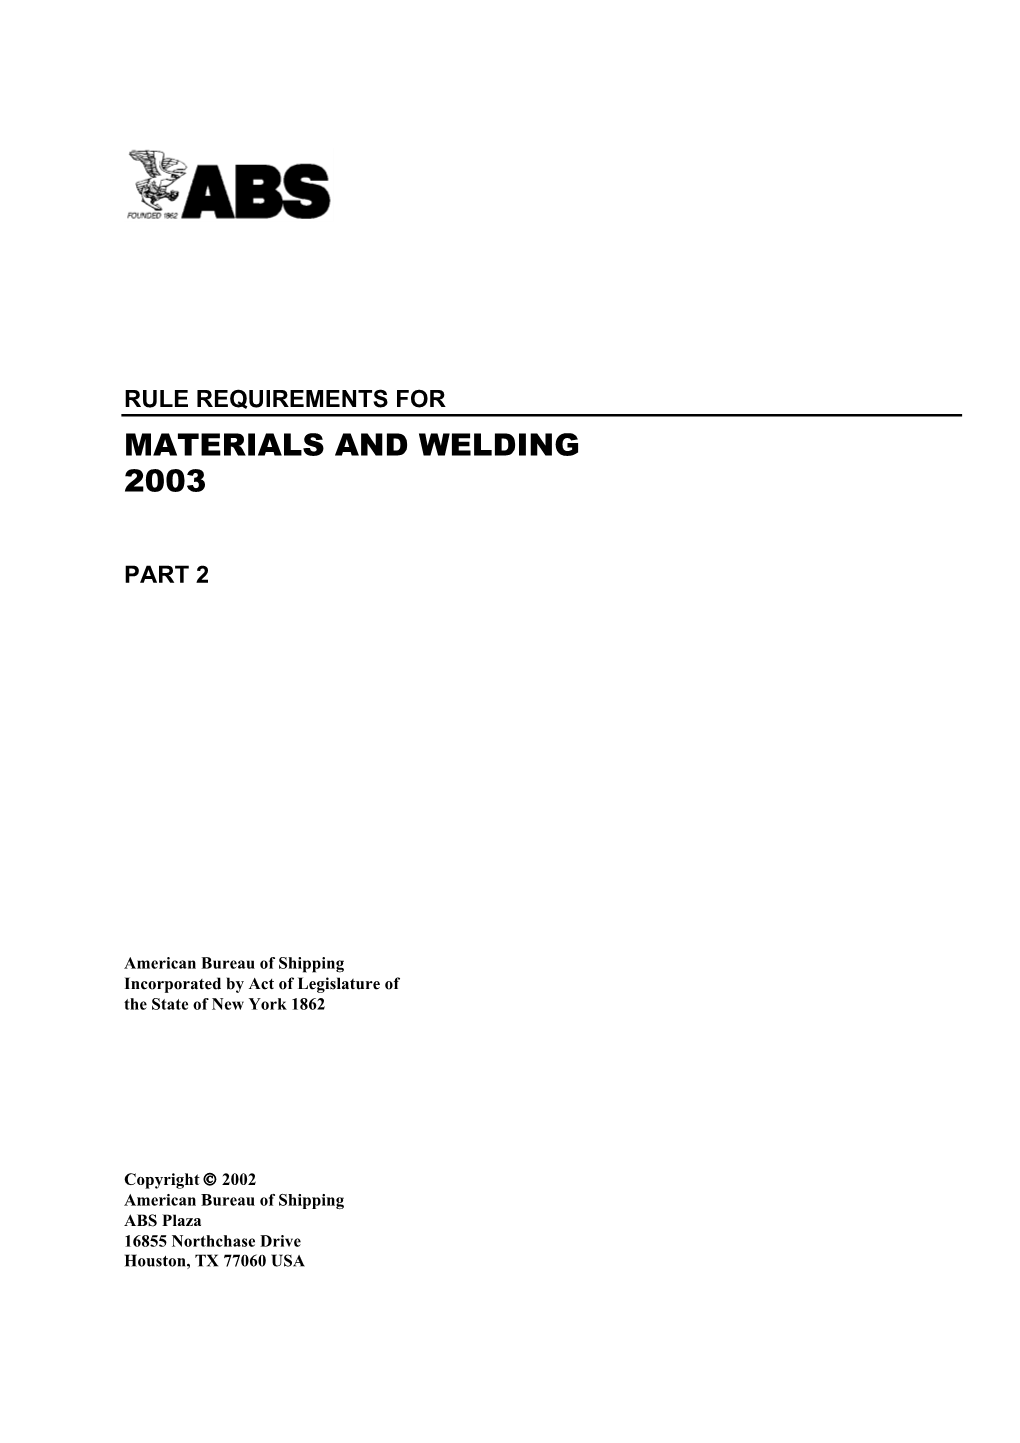 Part 2, Rule Requirements for Materials and Welding